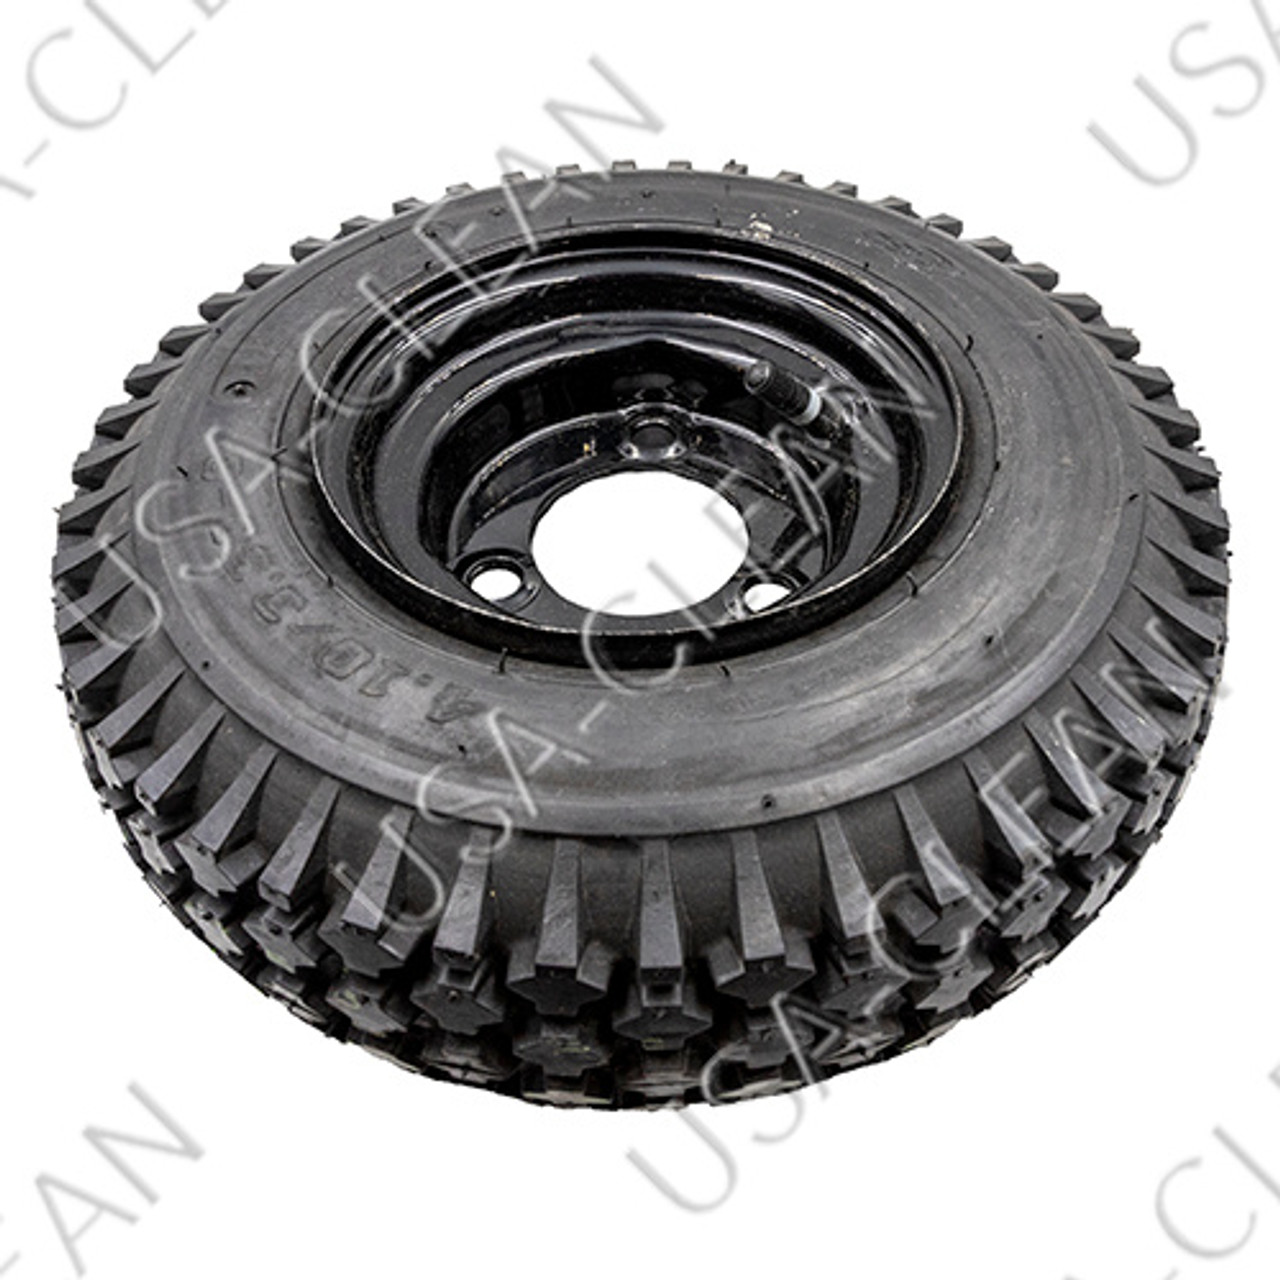 Foam tire assembly 475-3876 – Ships Fast from Our Huge Inventory